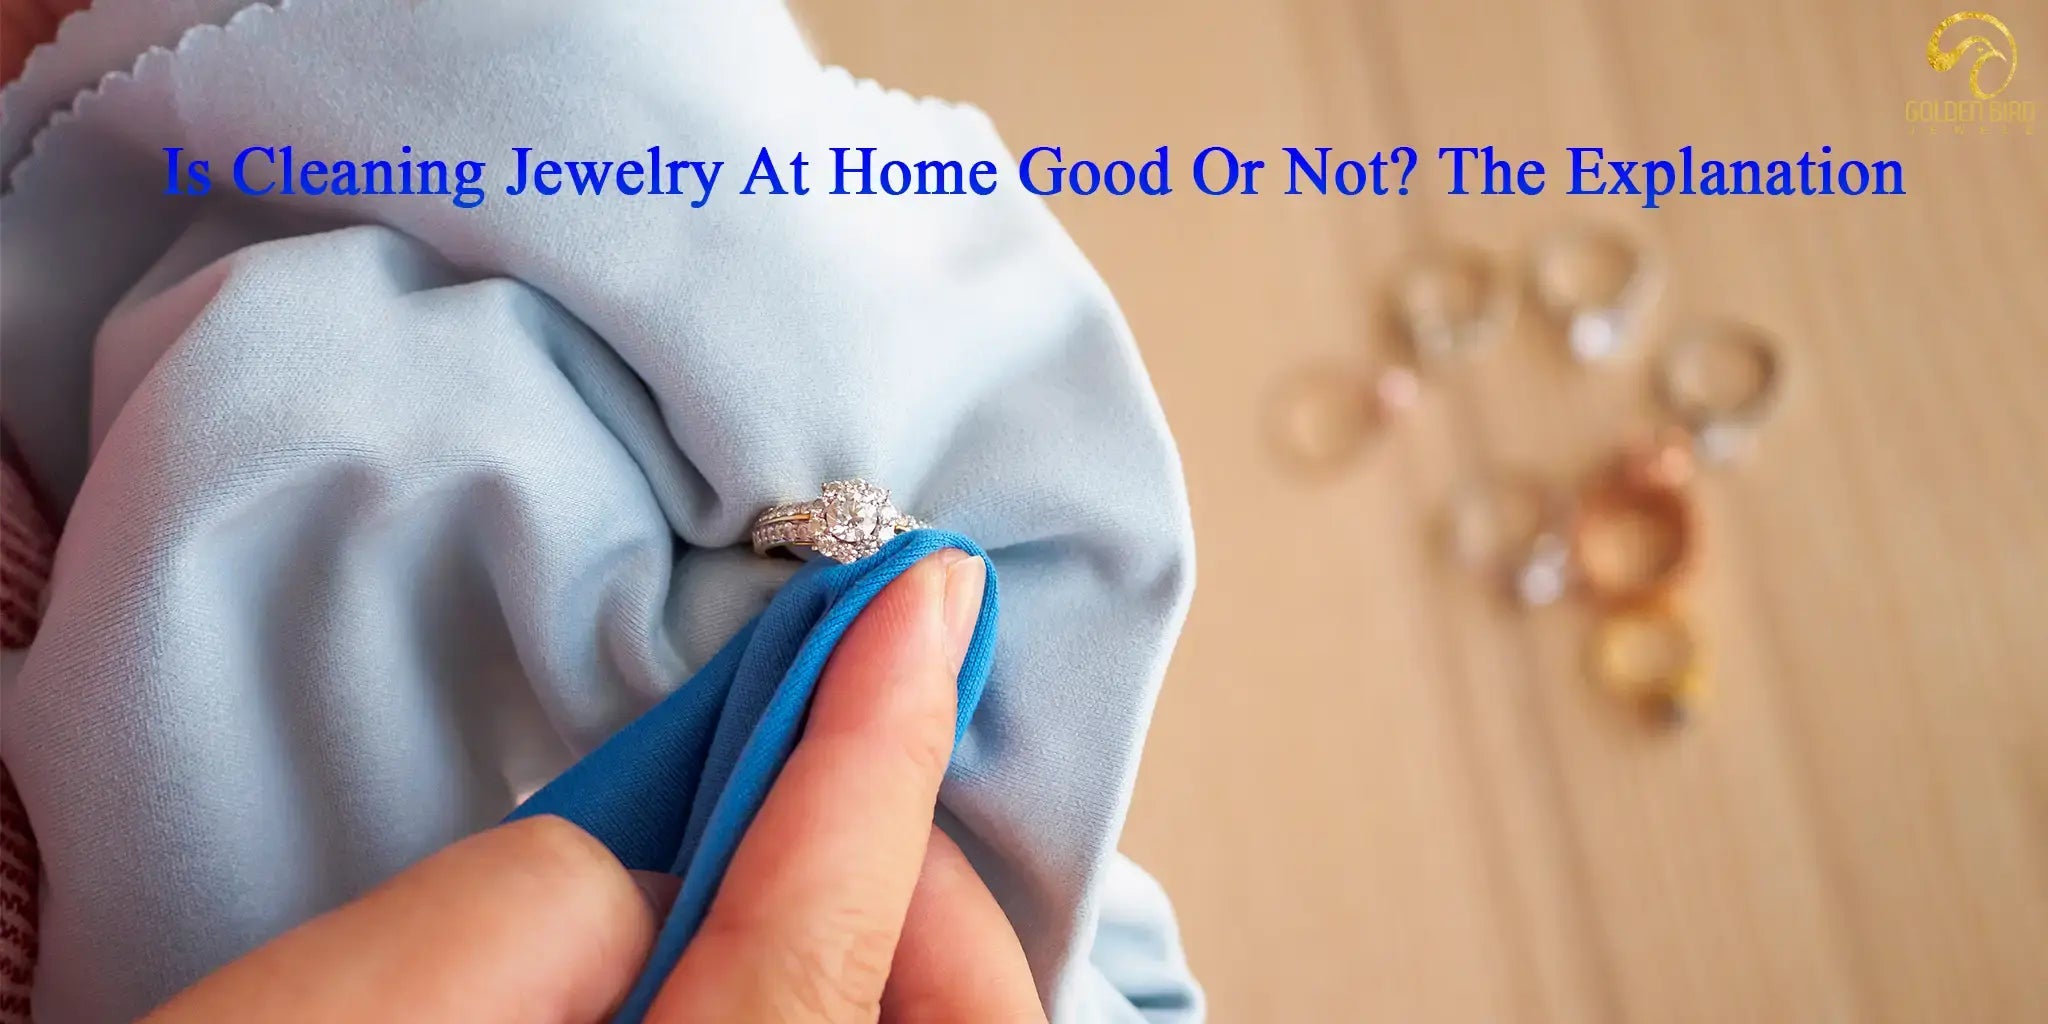 How to clean jewelry at home?